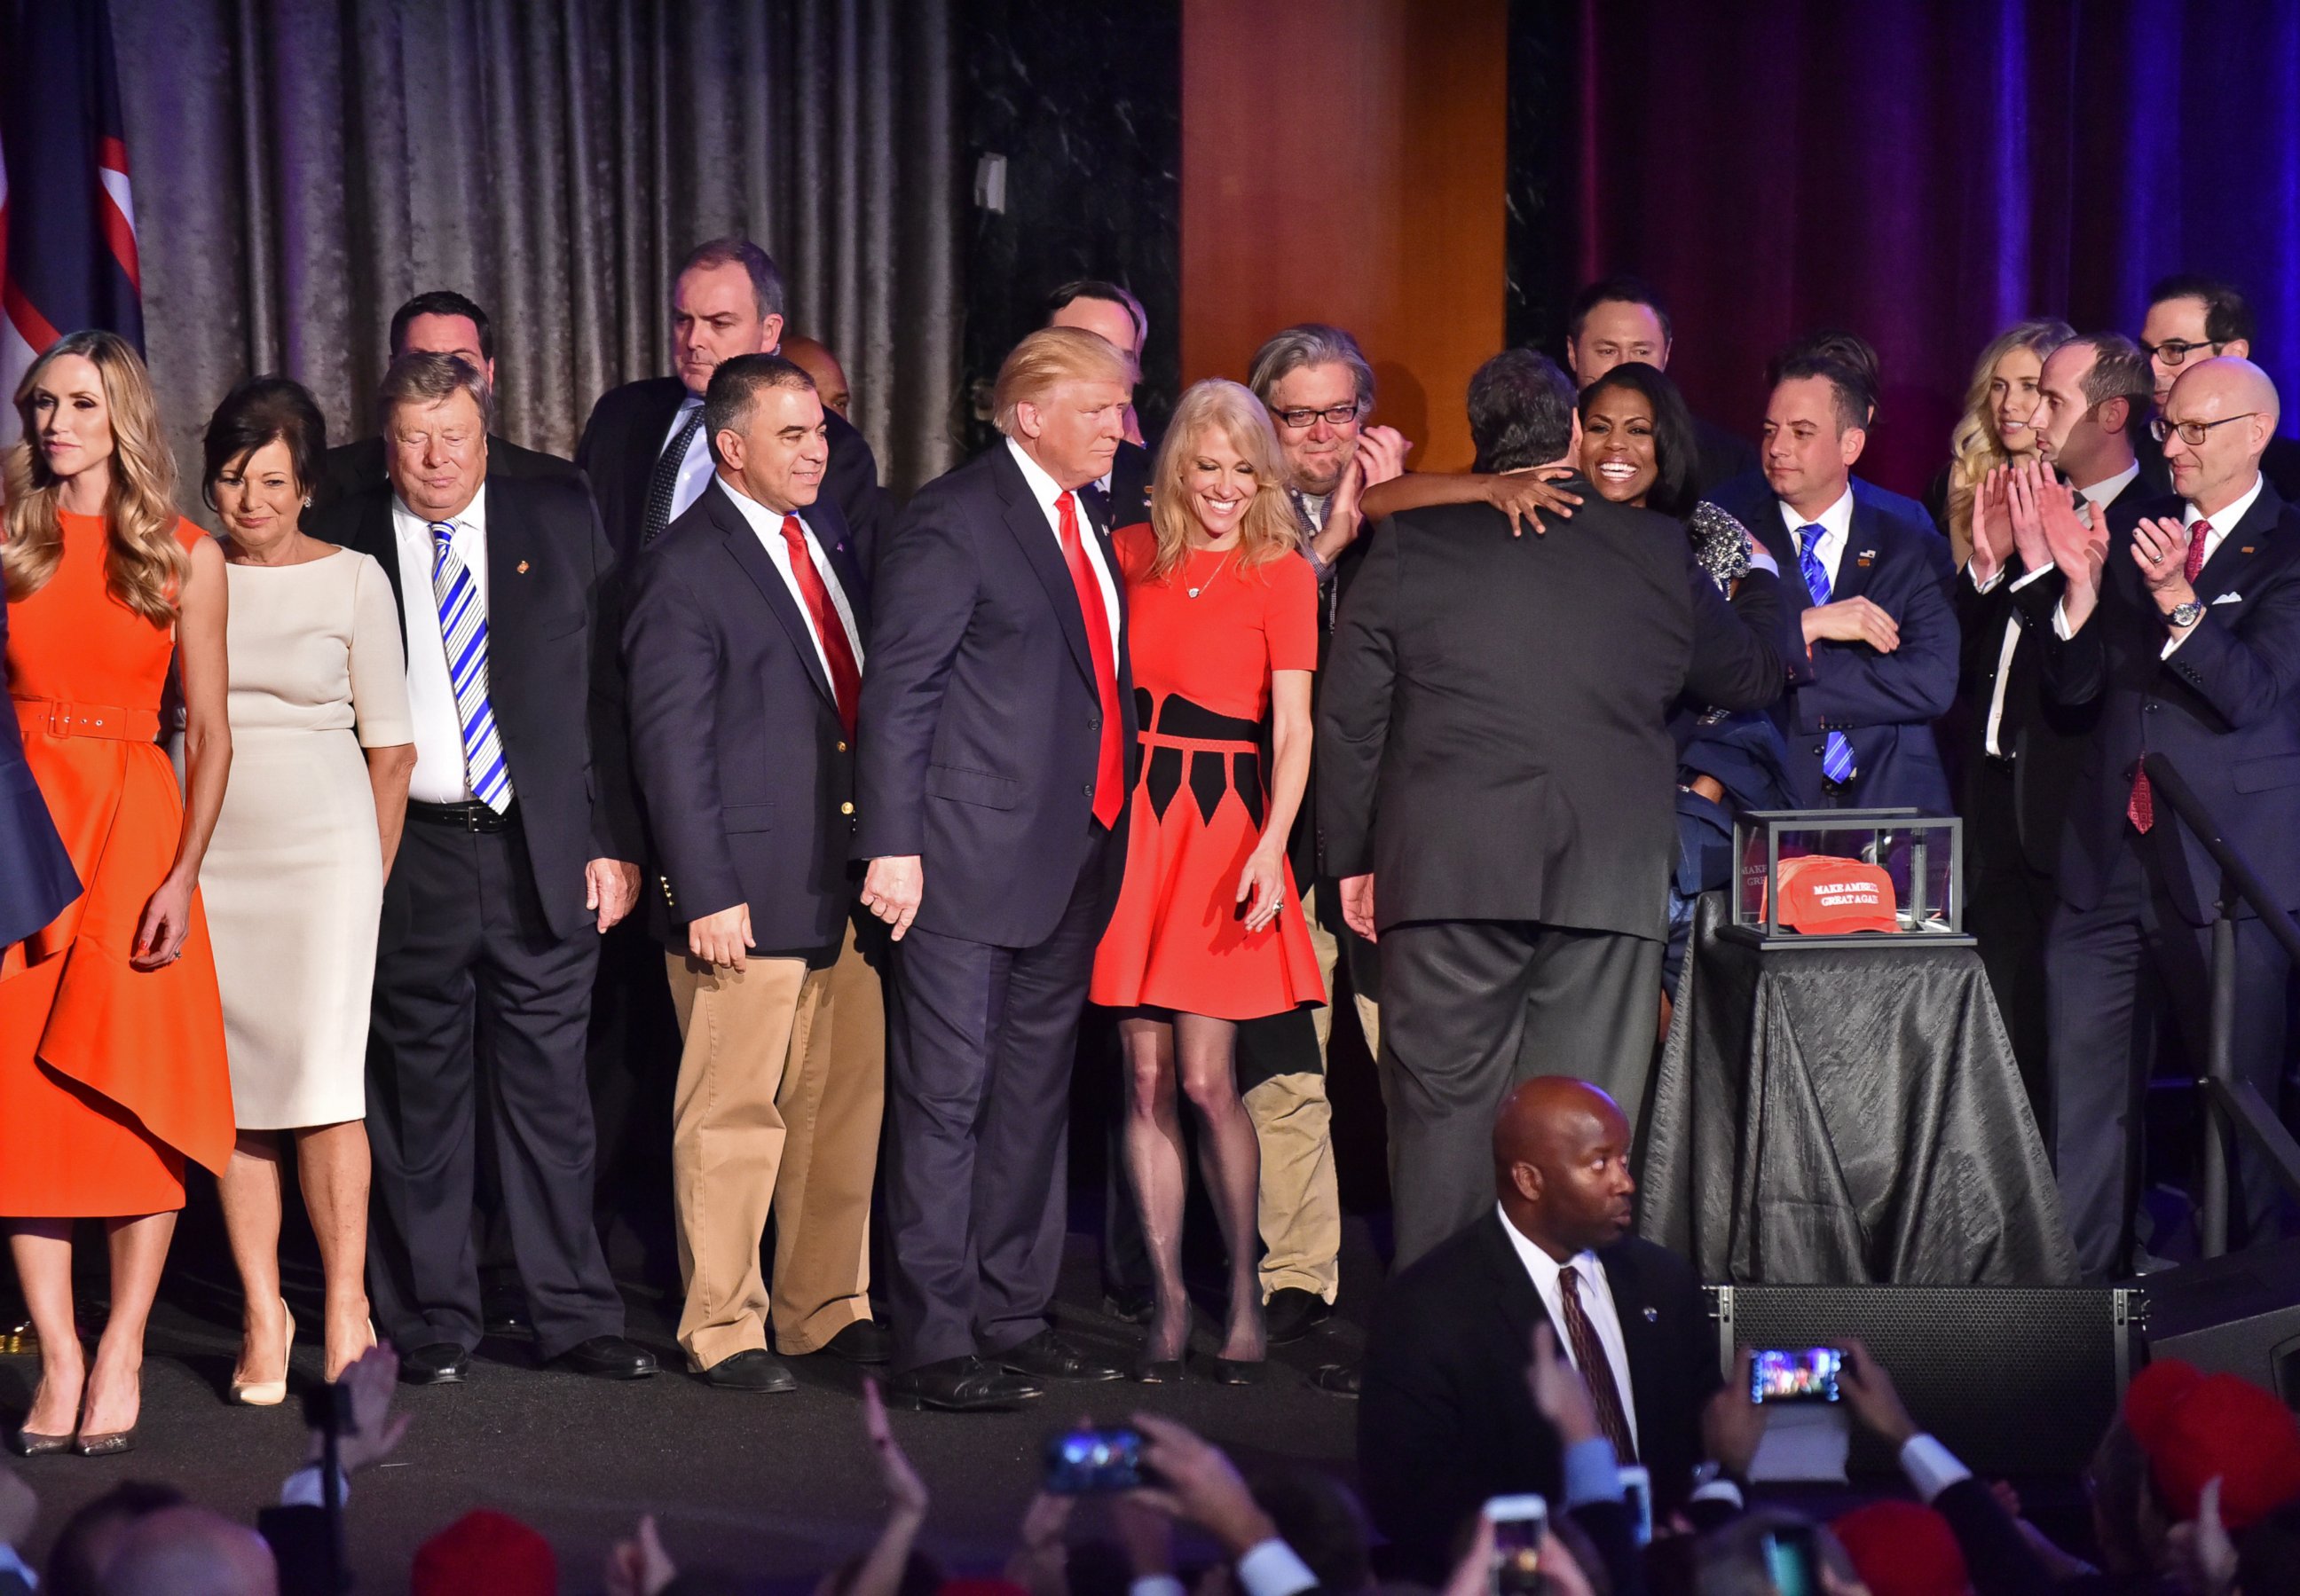 PHOTO: Donald Trump greets campaign manager Kellyanne Conway along with New Jersey Governor Chris Christie (back to camera) and staff member Omarosa Manigault (hugging Christie) after being declared the winner of the presidential election.